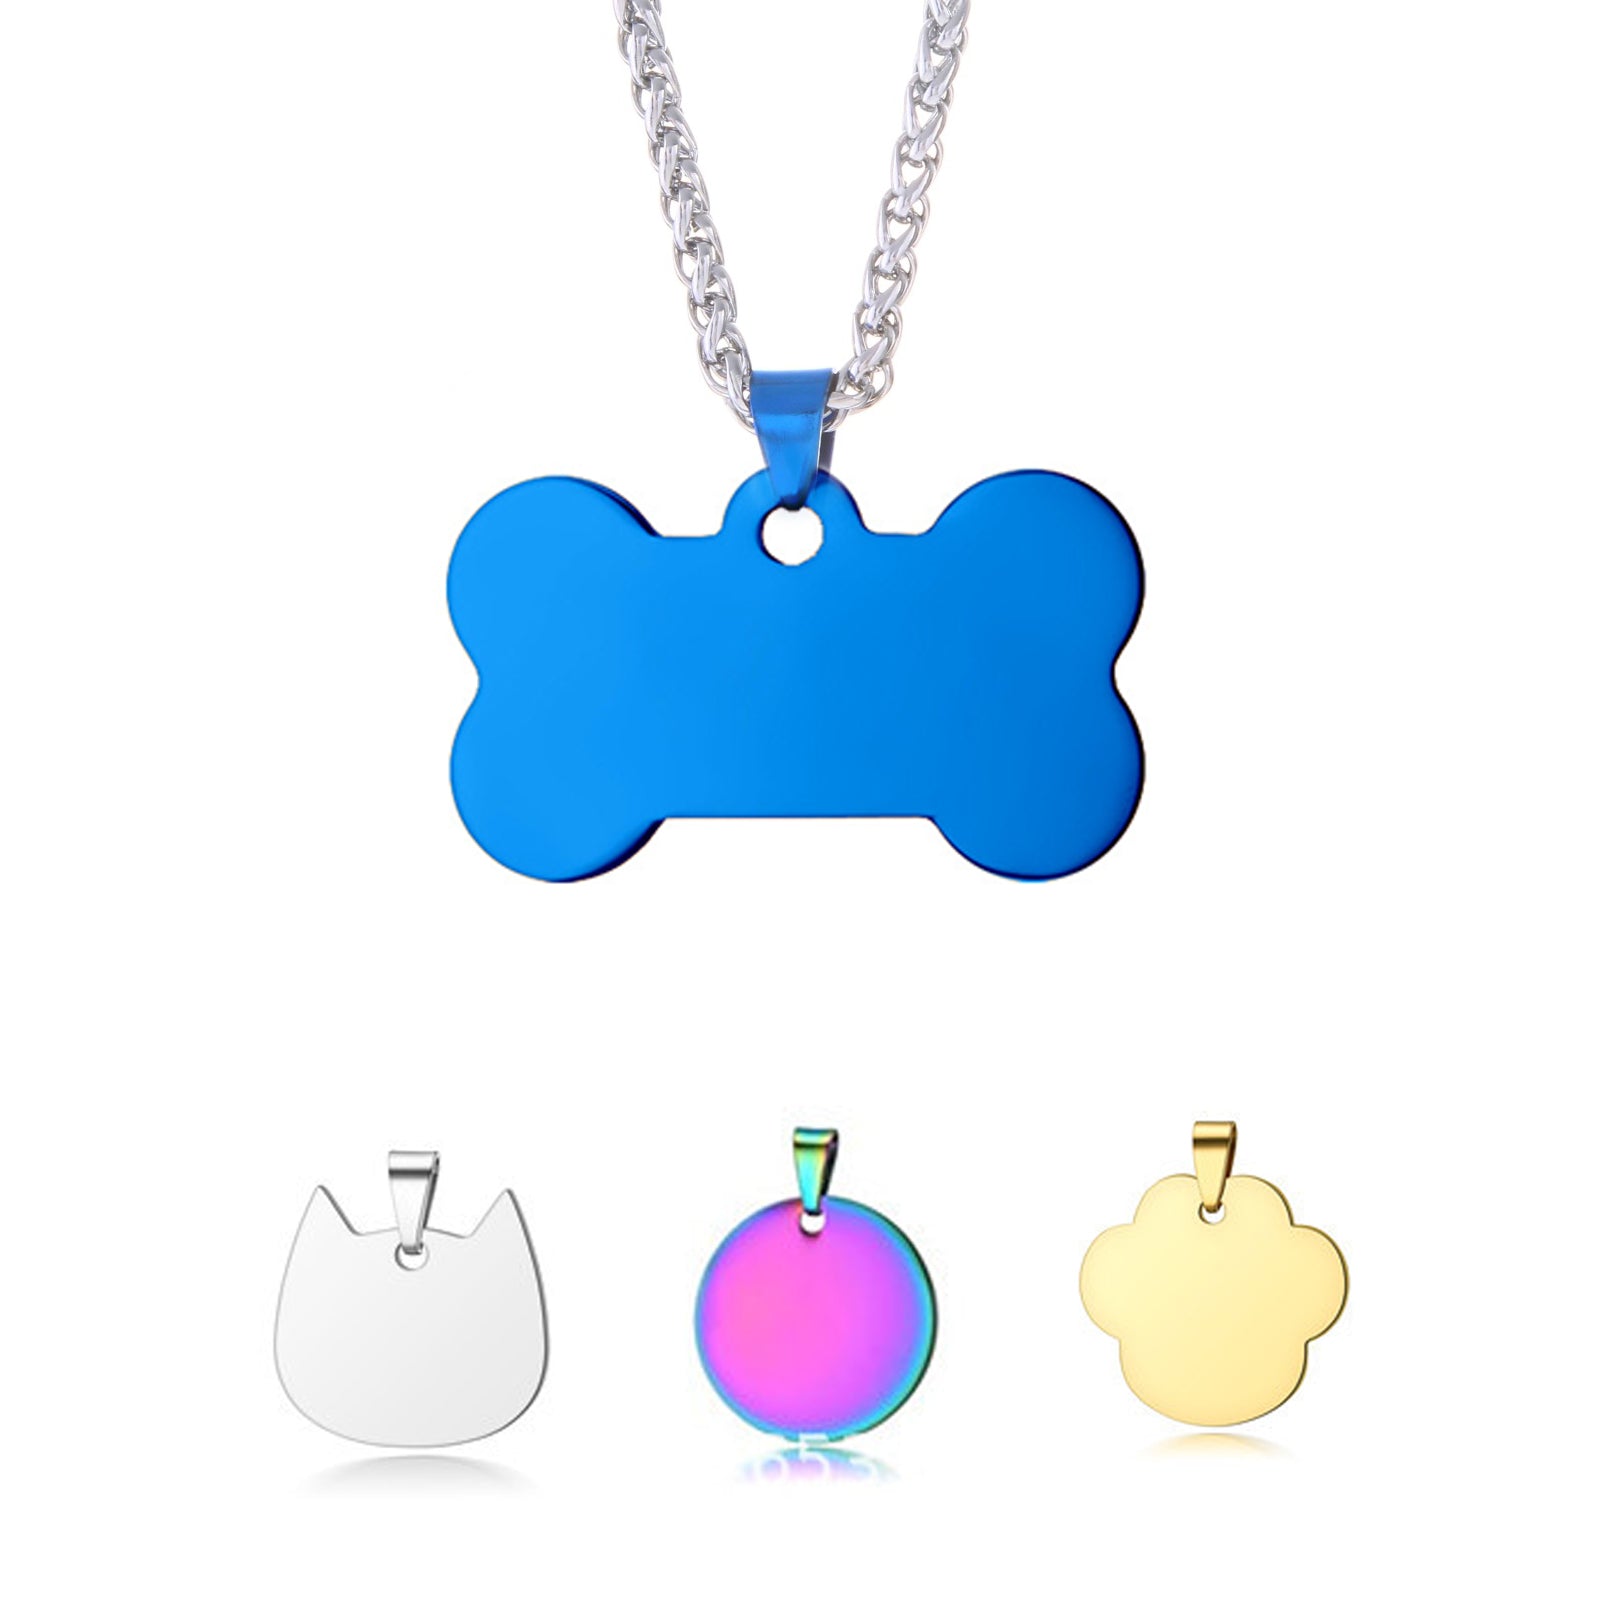 An image showcasing a set of 20pcs Titanium Steel Blank Stamping Tags Pets Tag Metal Pendant Charms for Falcon Laser Engraving created with a CrealityFalcon laser engraver. A blue bone-shaped tag hangs on a silver chain at the top. Below, from left to right, are a silver cat head-shaped tag, a multicolored round tag, and a yellow paw print-shaped tag, all with loops for attaching to collars.